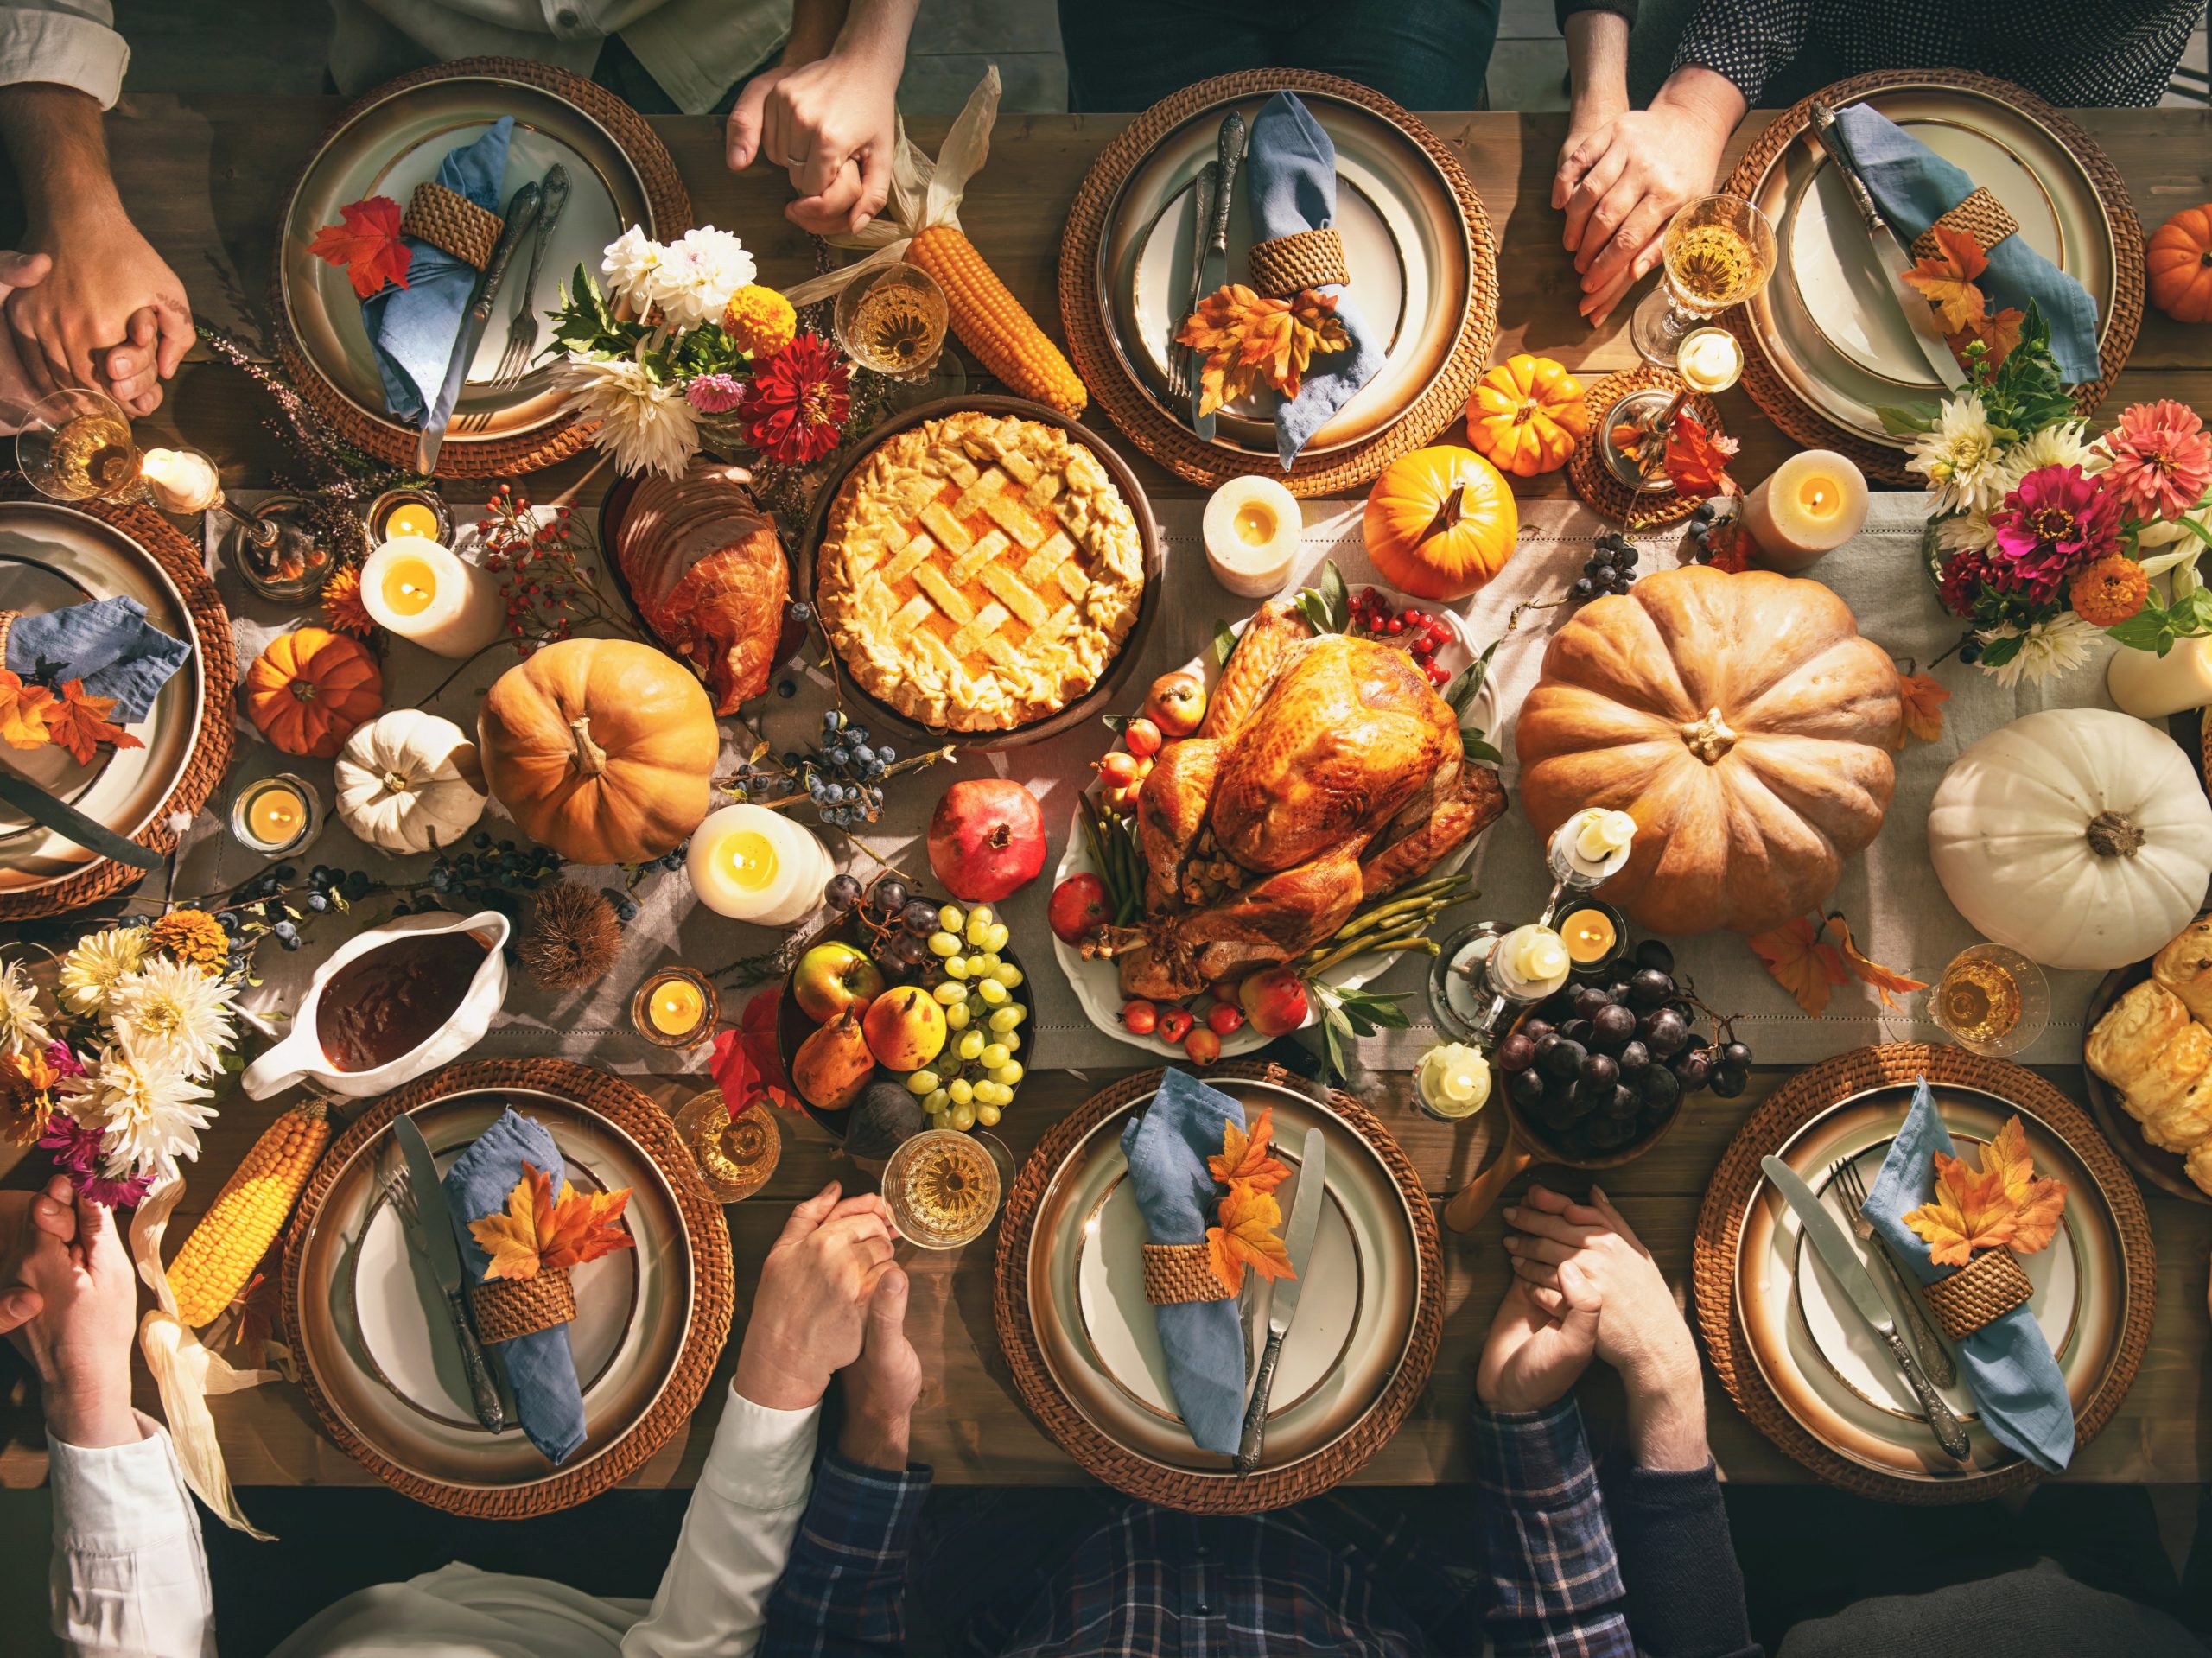 What can you do with anti-vaxxer family members this Thanksgiving?